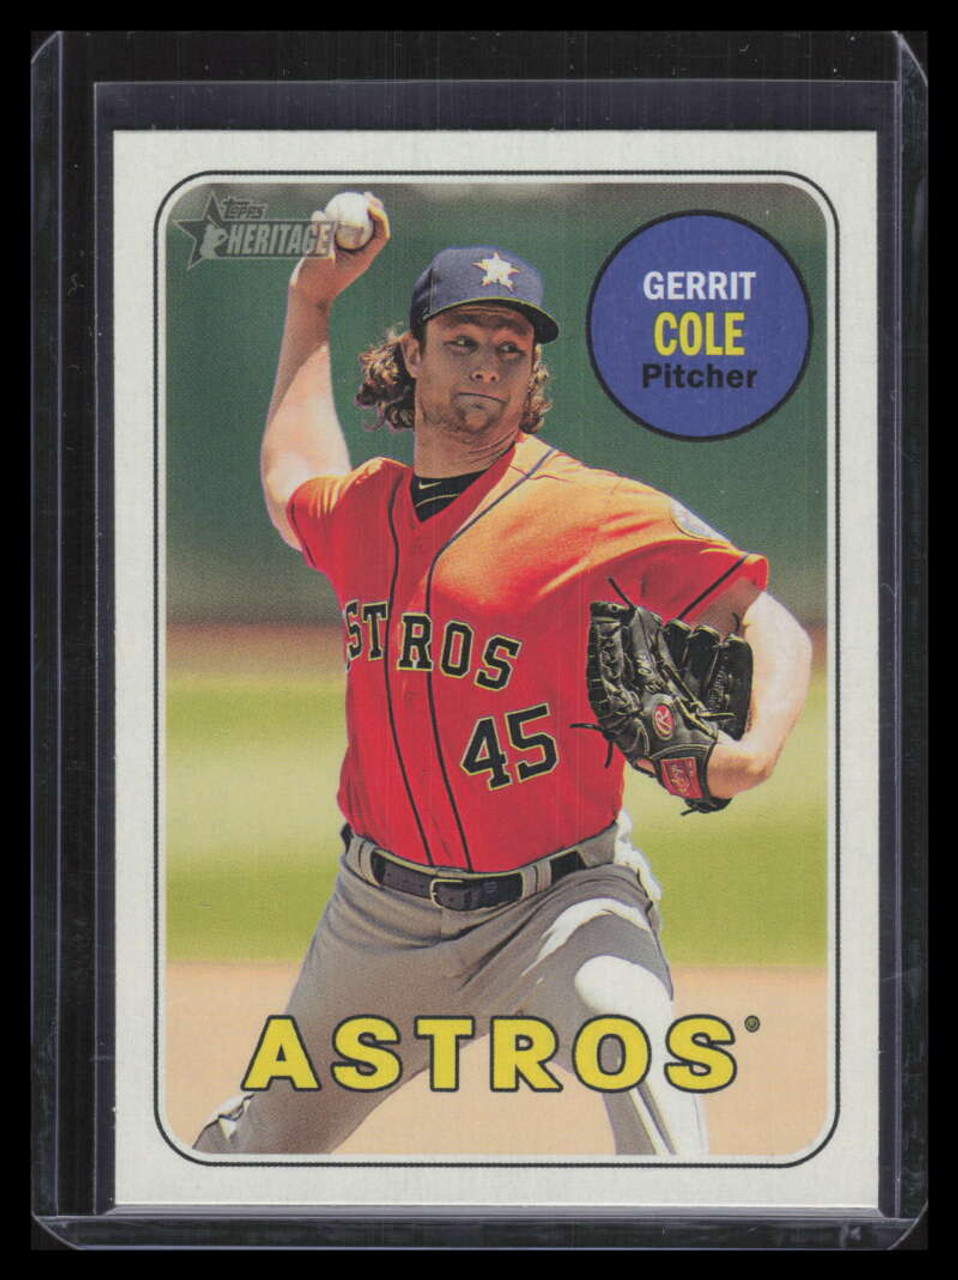 2018 Topps Heritage Action Variations 715 Gerrit Cole - Sportsnut Cards